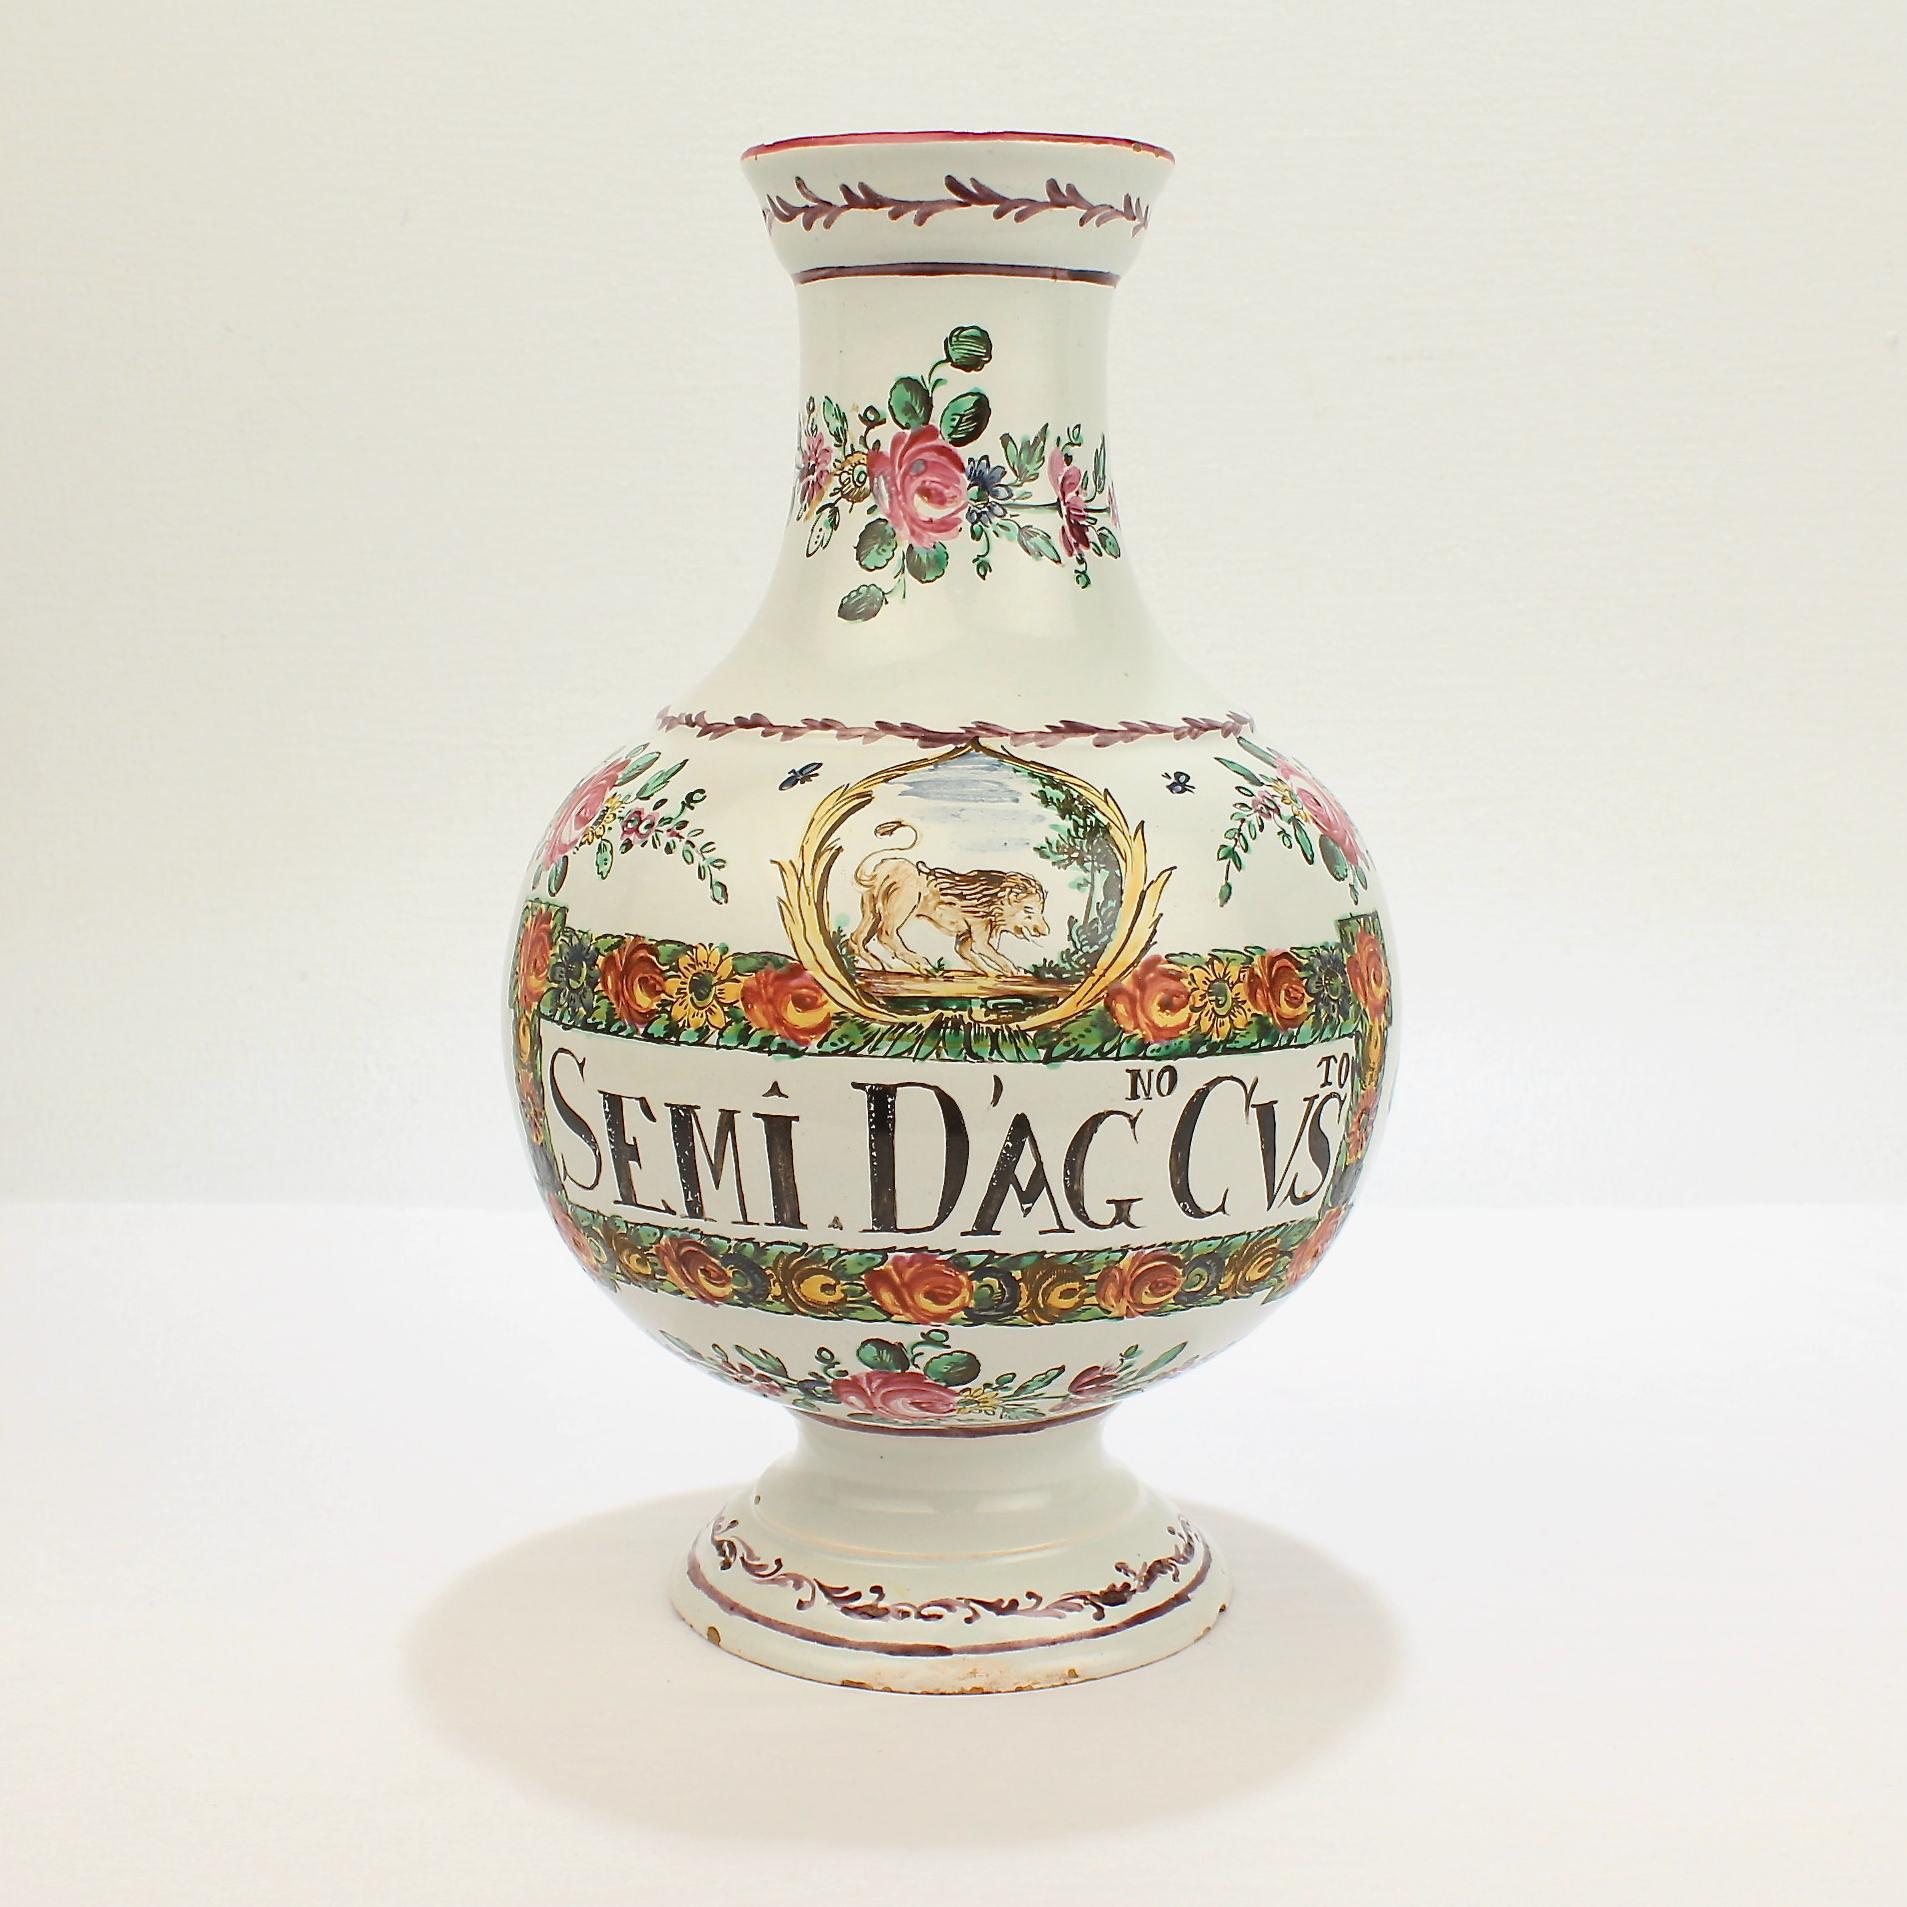 A very fine antique faience pottery jar.

The jar is marked for 